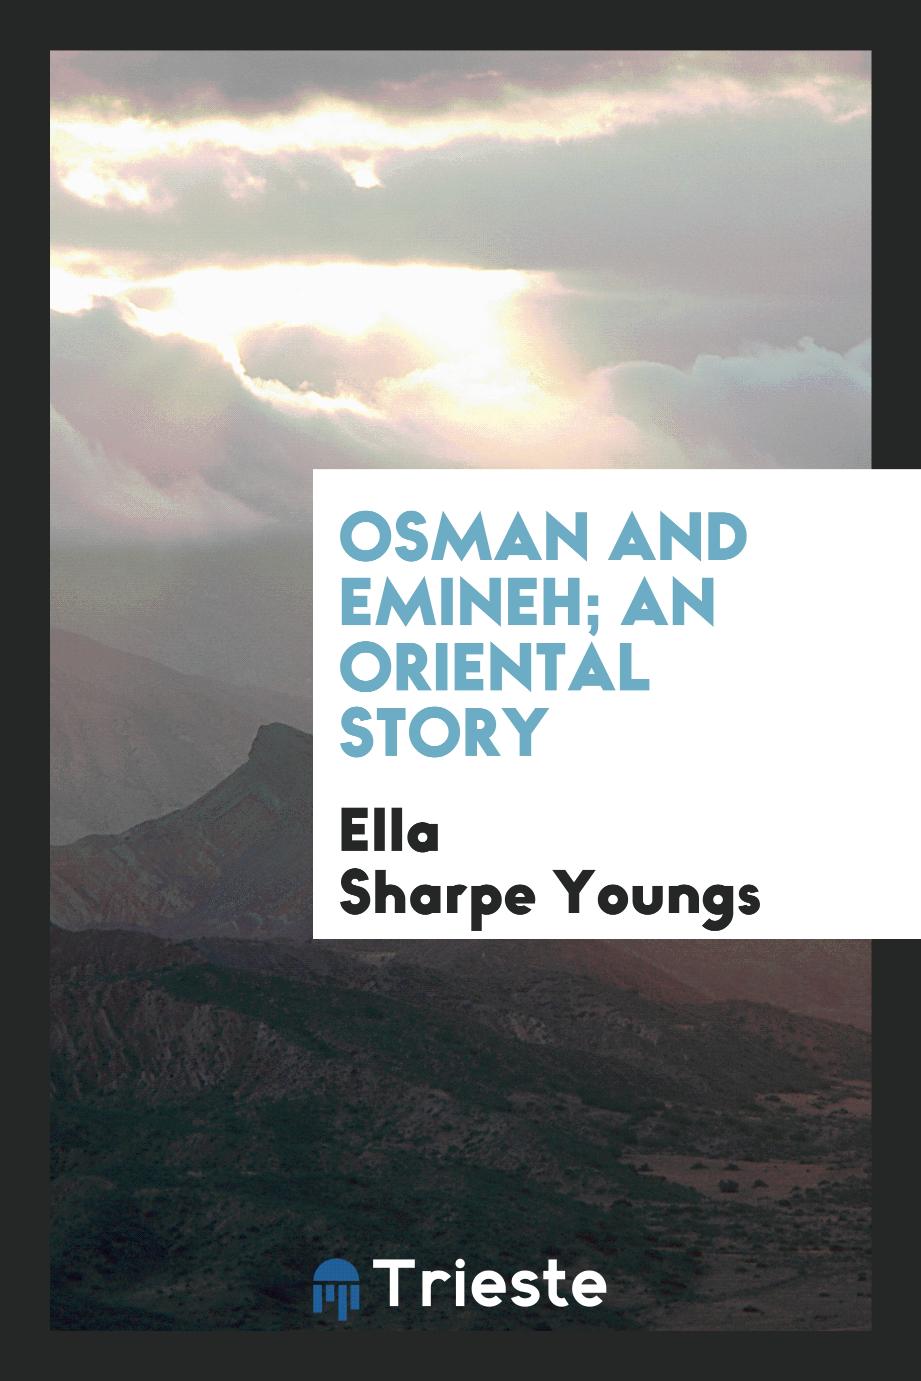 Osman and Emineh; An Oriental Story